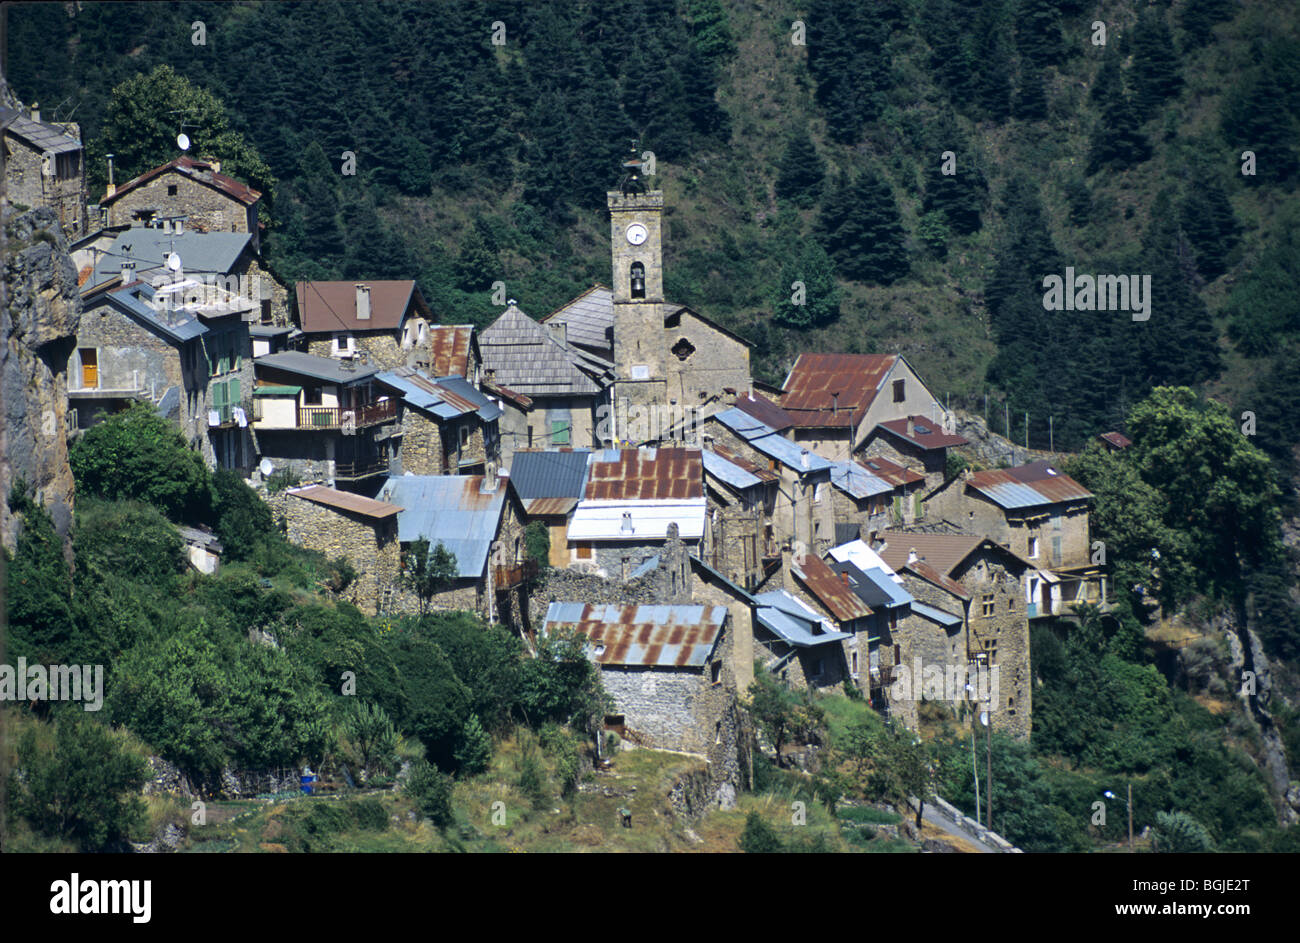 View over Roubion, a Perched Alpine Village or Mountain Village in the Tinée Valley, French Lower Alps, Alpes-Maritimes, France Stock Photo